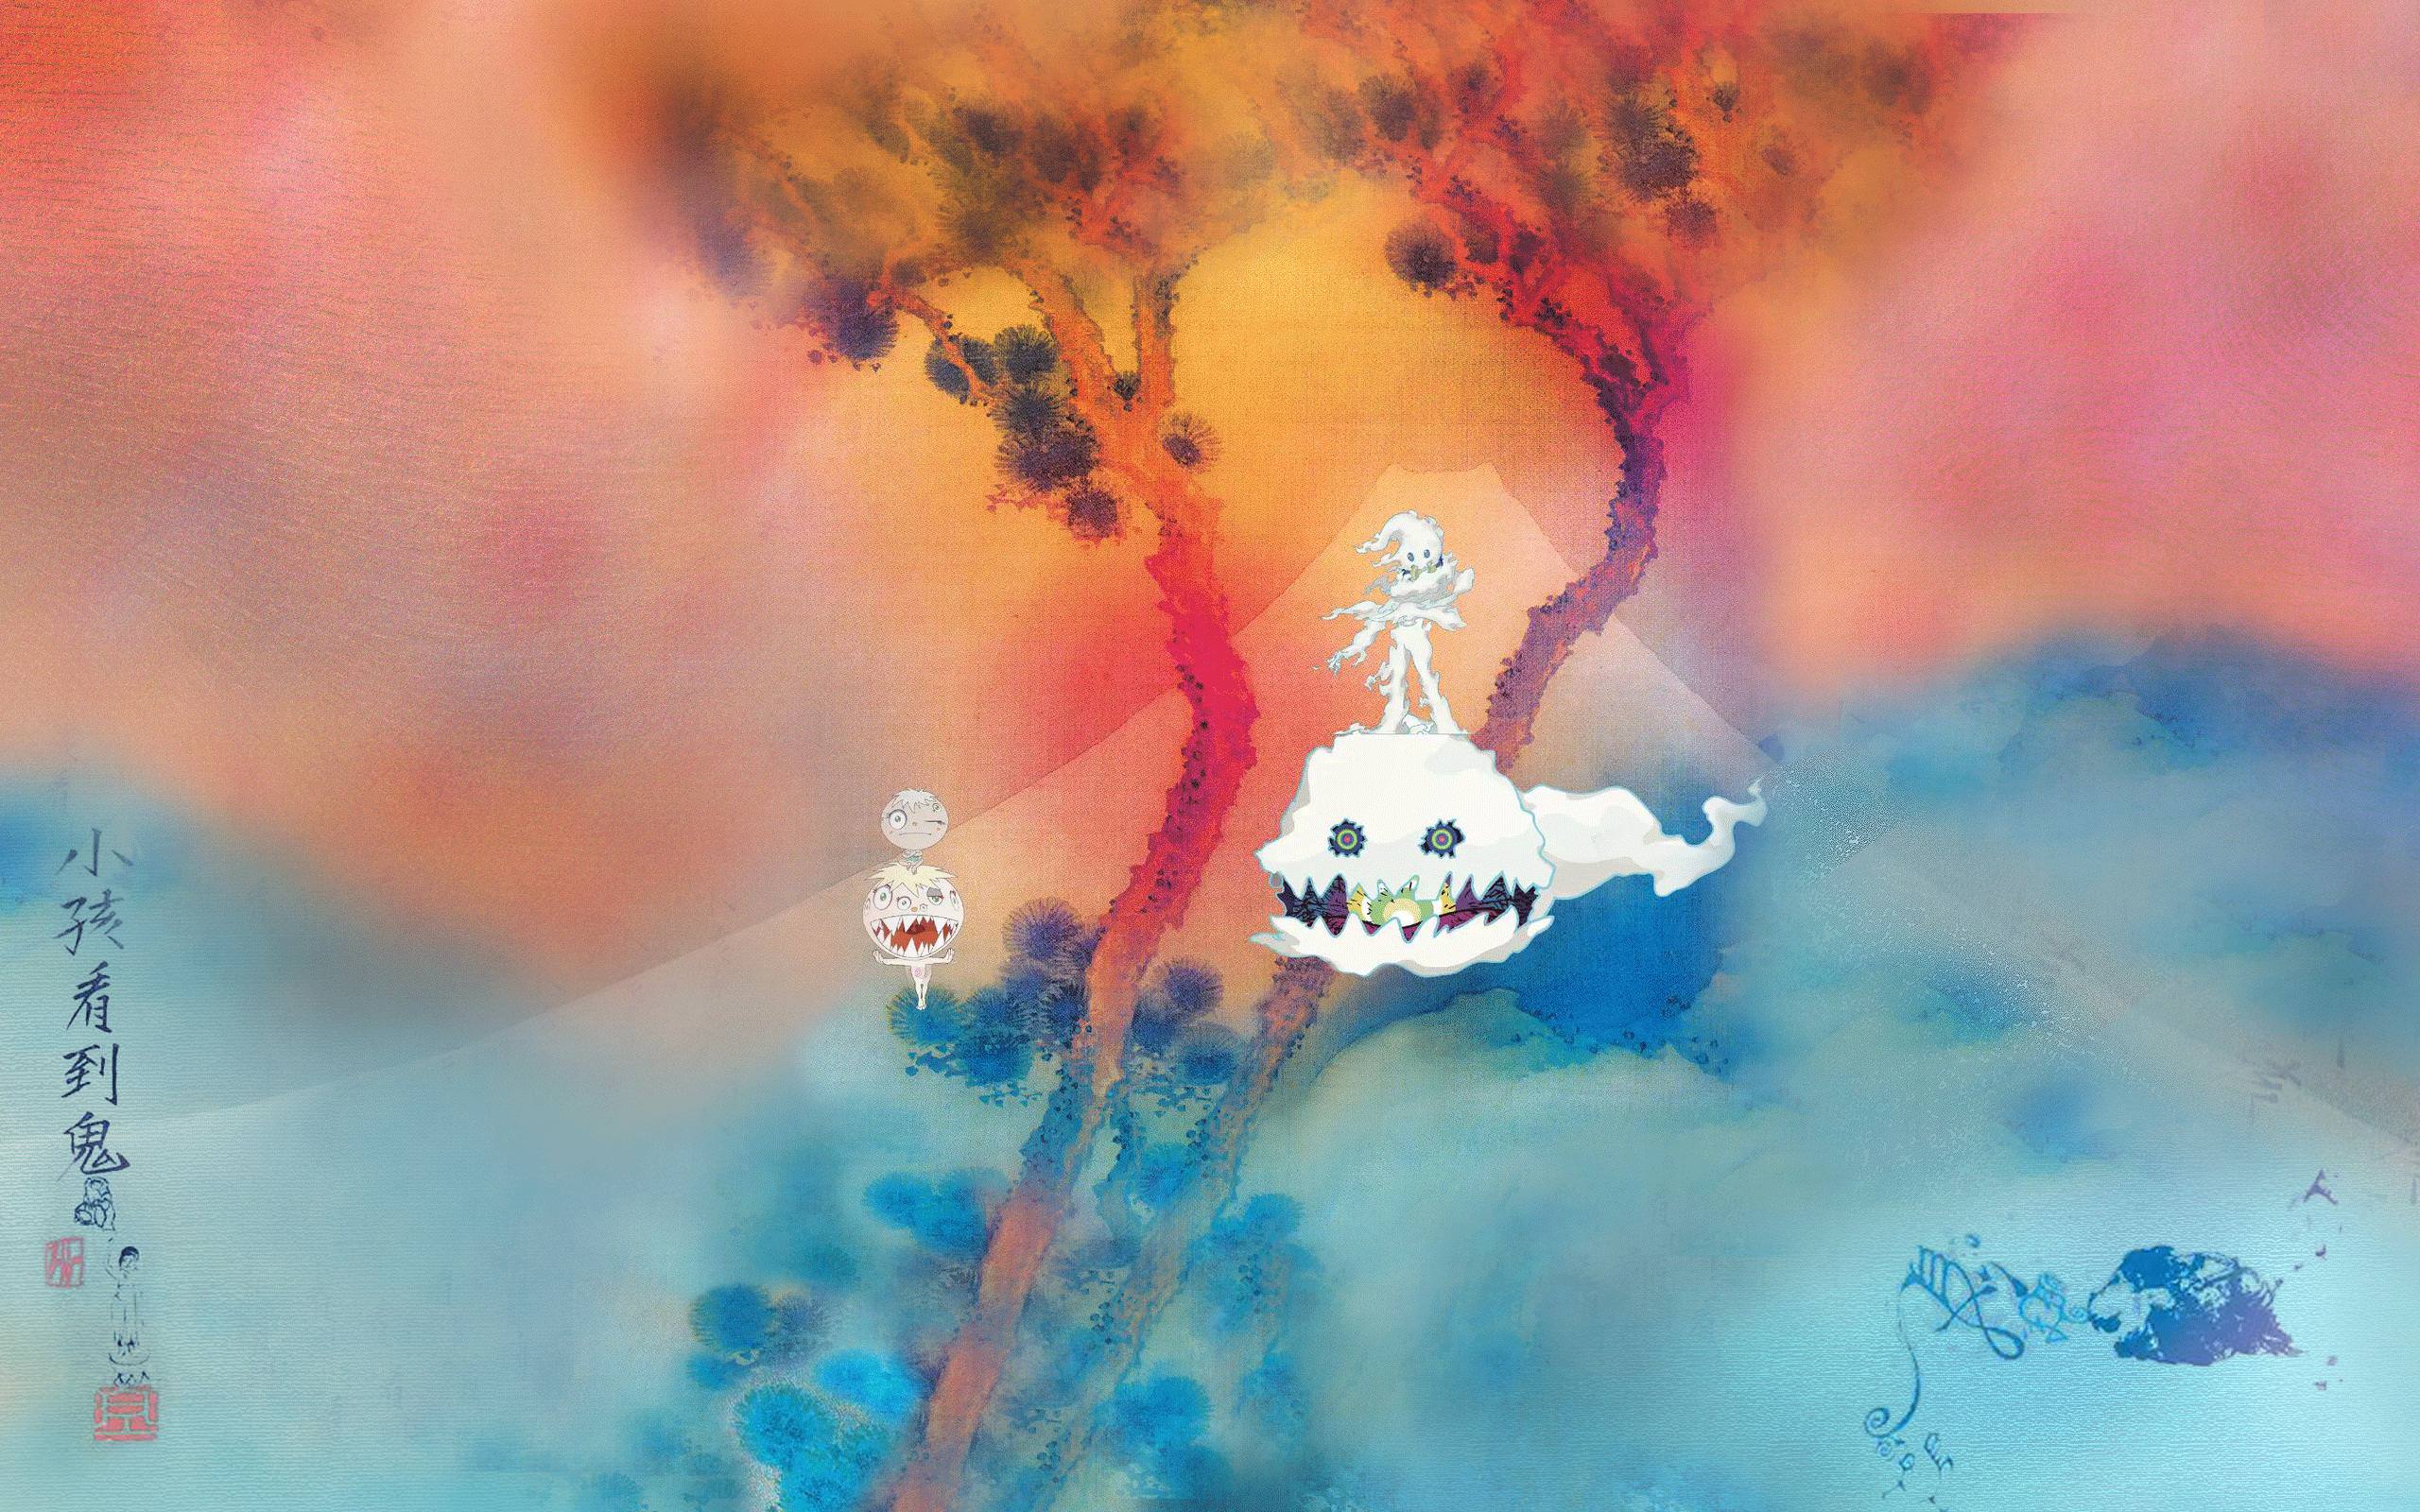 I made the Kids See Ghosts cover art into a WQXGA 2560 x 1600